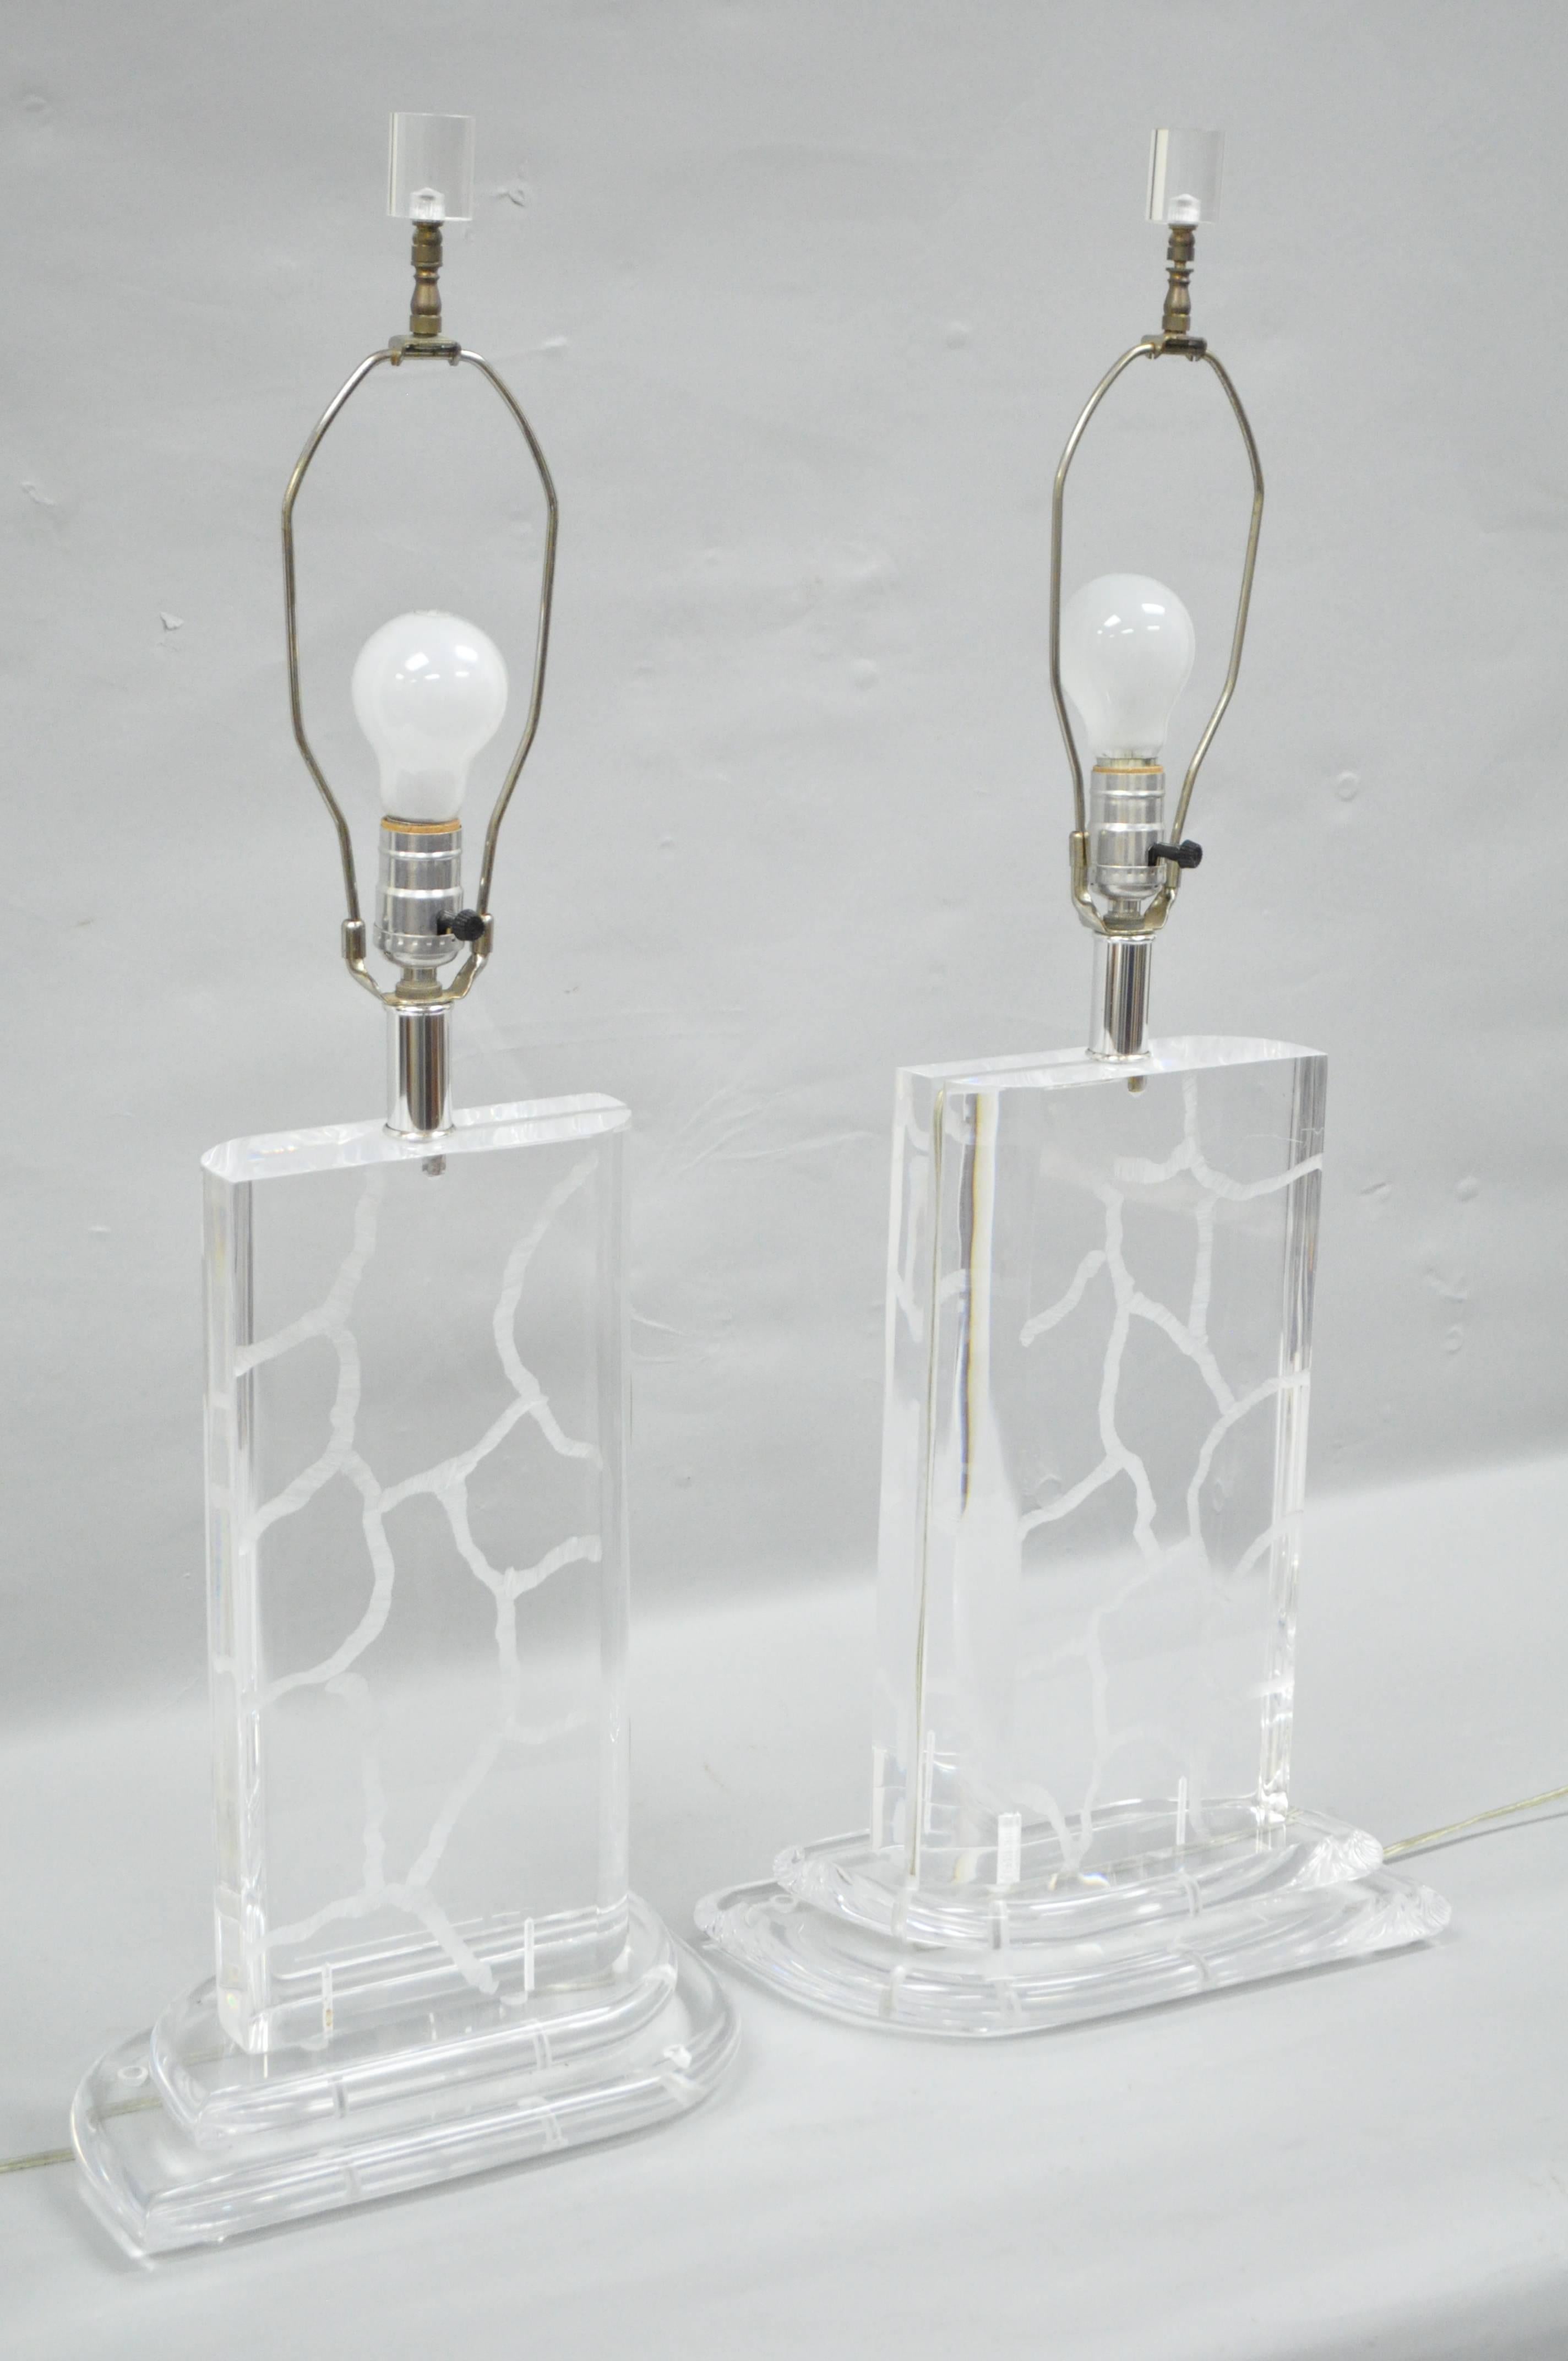 Pair of van teal Mid-Century Modern or Hollywood Regency clear etch decorated Lucite table lamps. Item features solid clear Lucite forms with wave or crackle etched design topped off with Lucite finials. Designed By Hivo Van Teal.
Measurements: 32